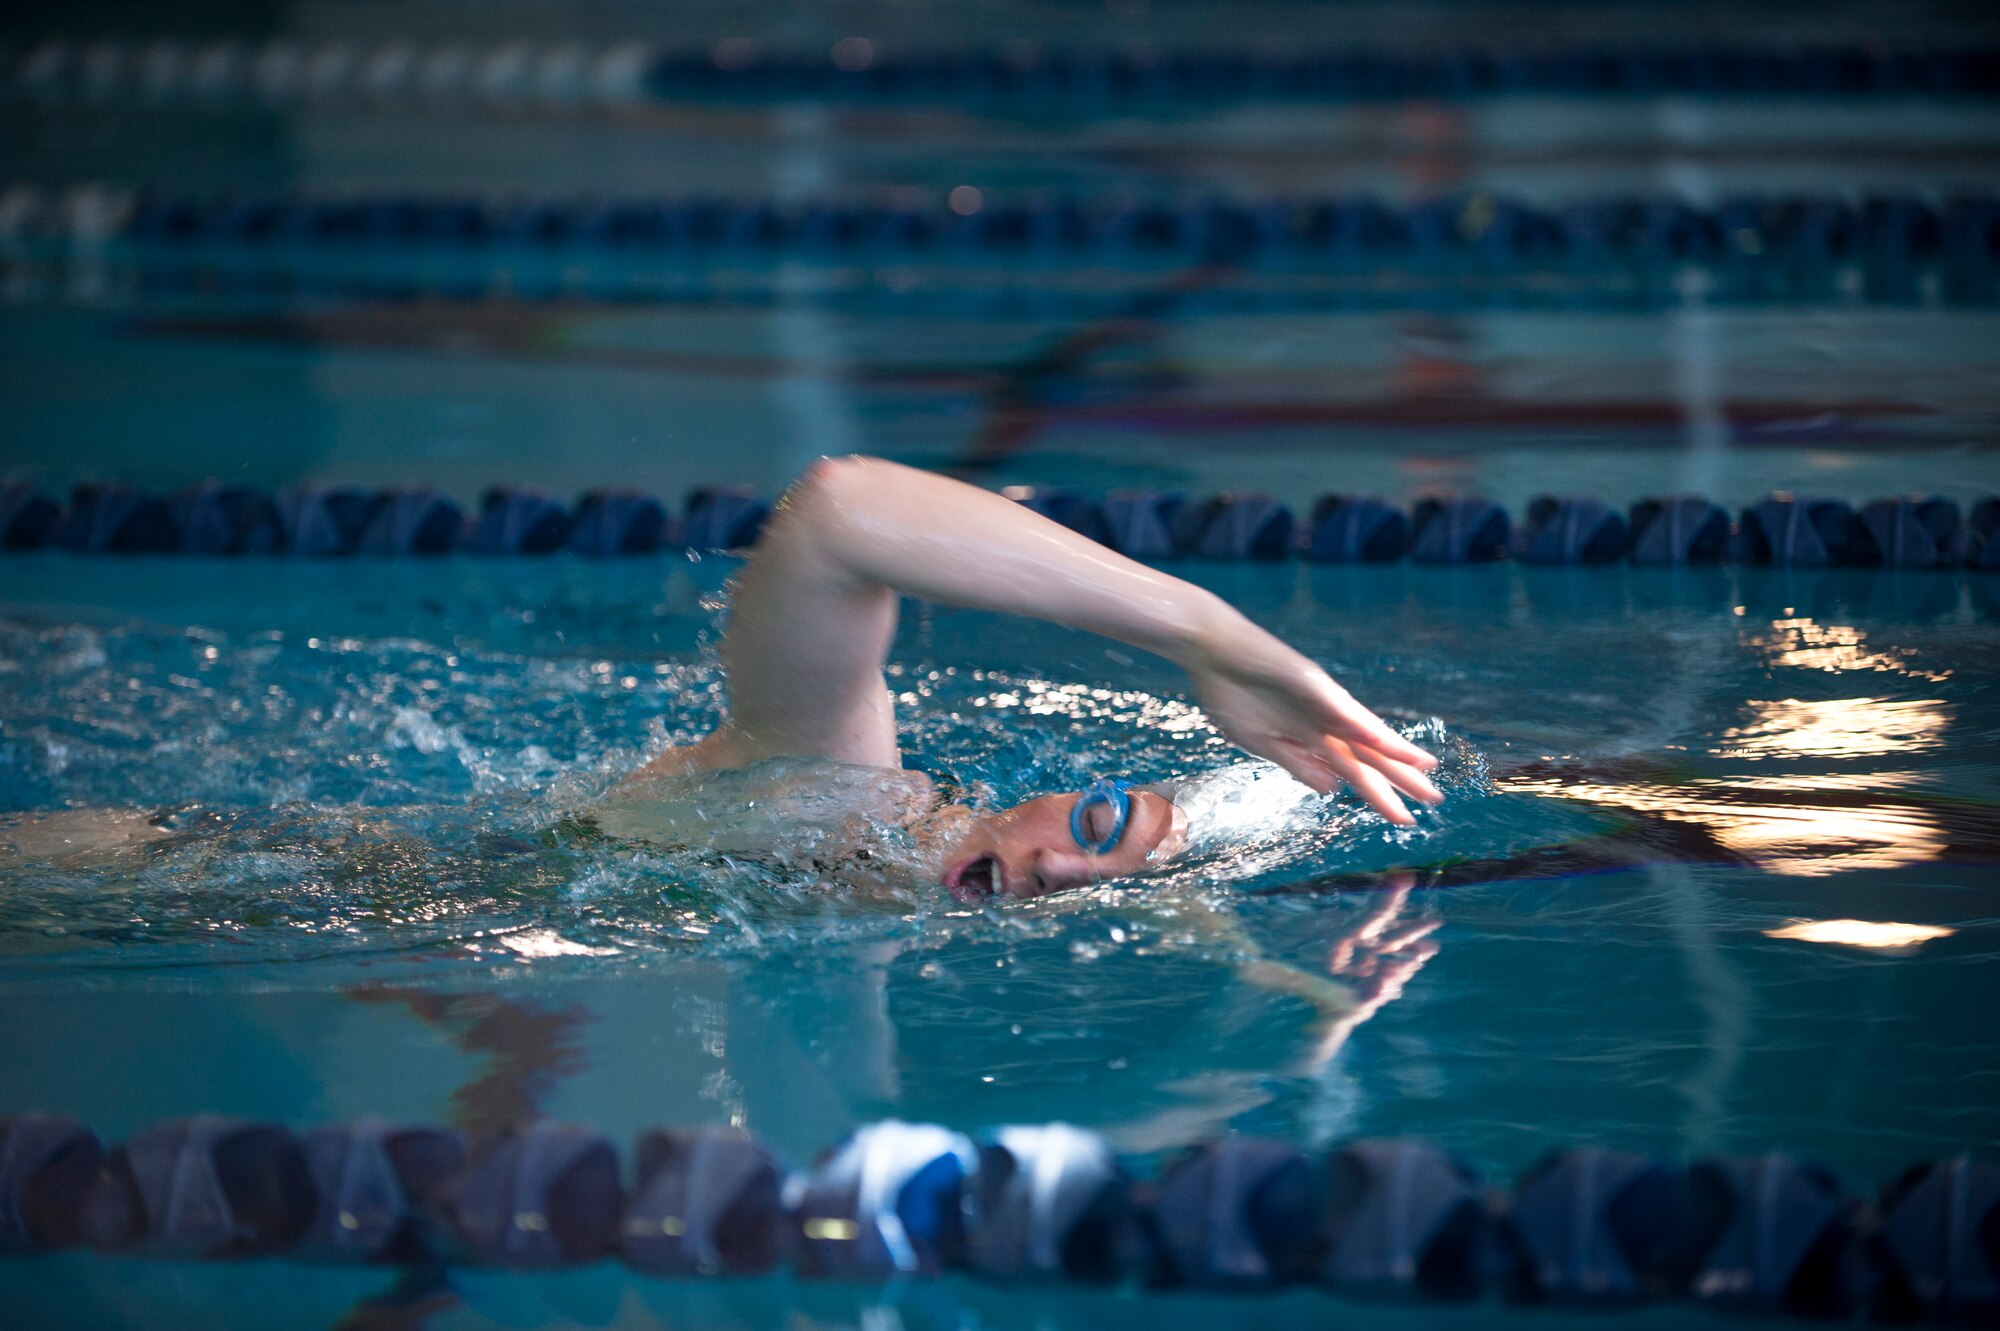 Linn Knight, 2015 U.S. Air Force Trials participant, practices the freestyle stroke during a practice swimming session at Nellis Air Force Base, Nev., Feb. 27, 2015. In addition to encouraging wounded warriors to compete in adaptive sports, the trials provide wounded warrior families with a variety of support services, making their jobs as care givers more manageable and helping to alleviate the stress that comes with a major life change. (U.S. Air Force photo by Senior Airman Thomas Spangler)